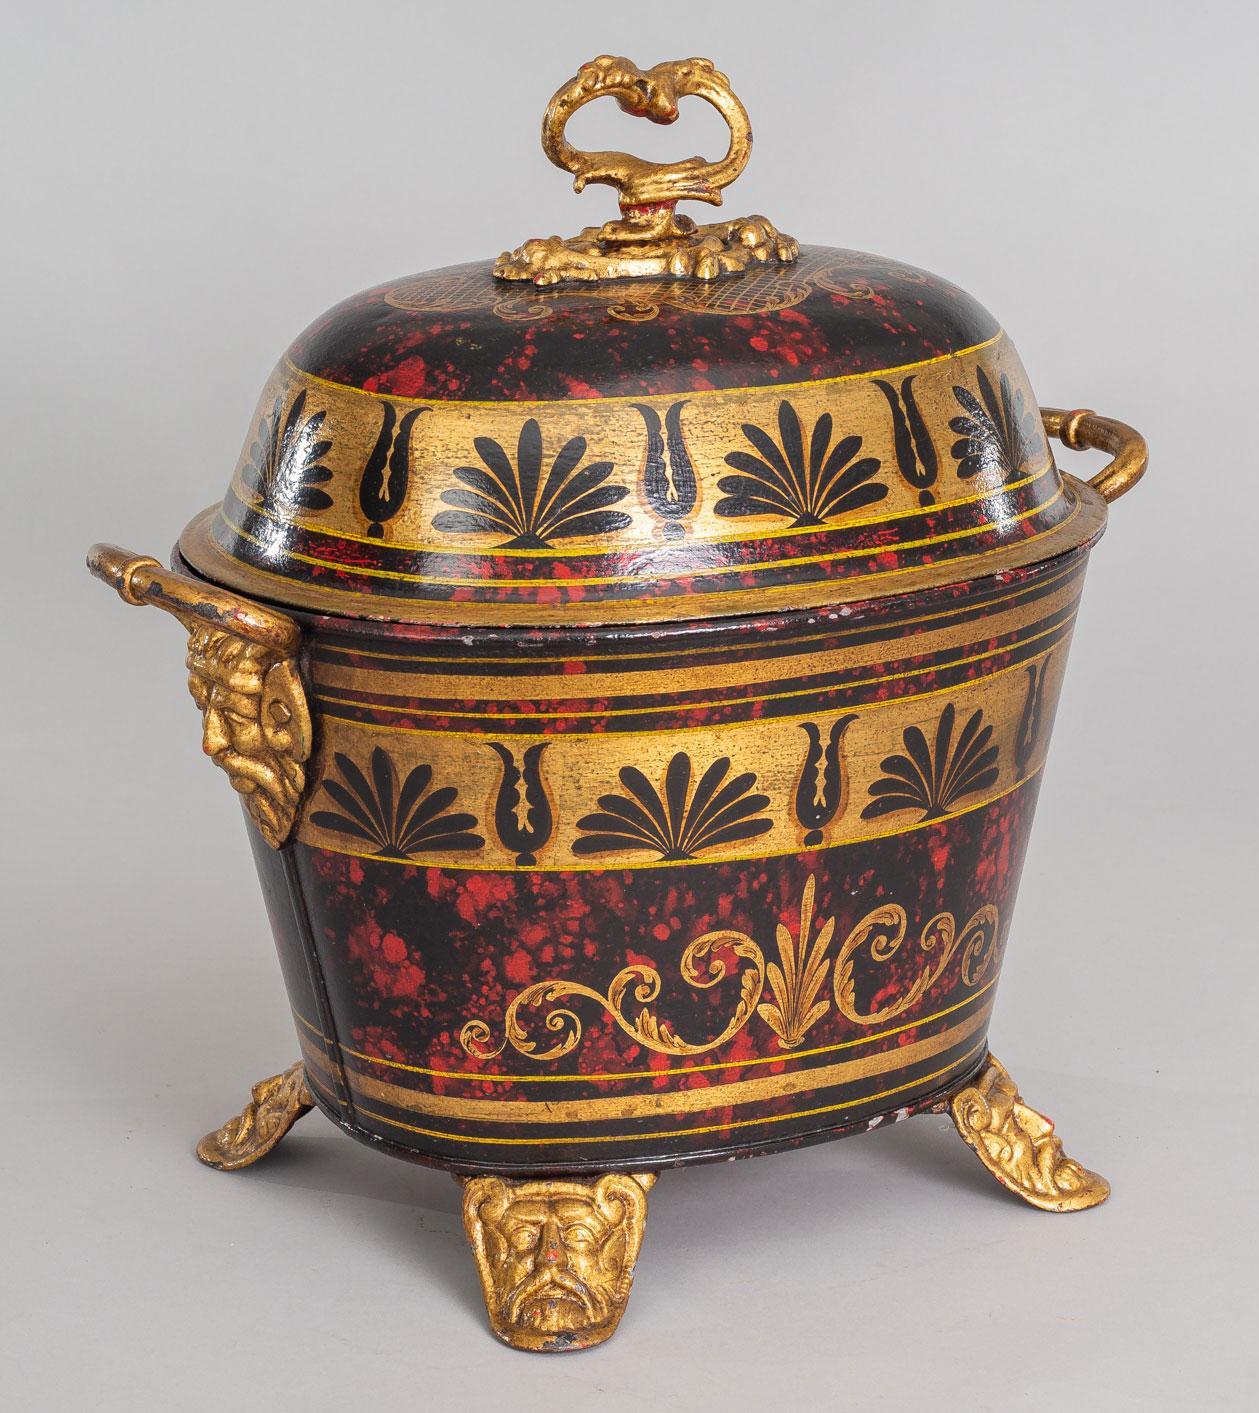 A late Regency toleware oval coal scuttle and cover decorated with wide gilded bands painted with black stylized acanthus leaves on a striking mottled red and black tortoiseshell-like background, the gilded handles and feet with Norse head masks,